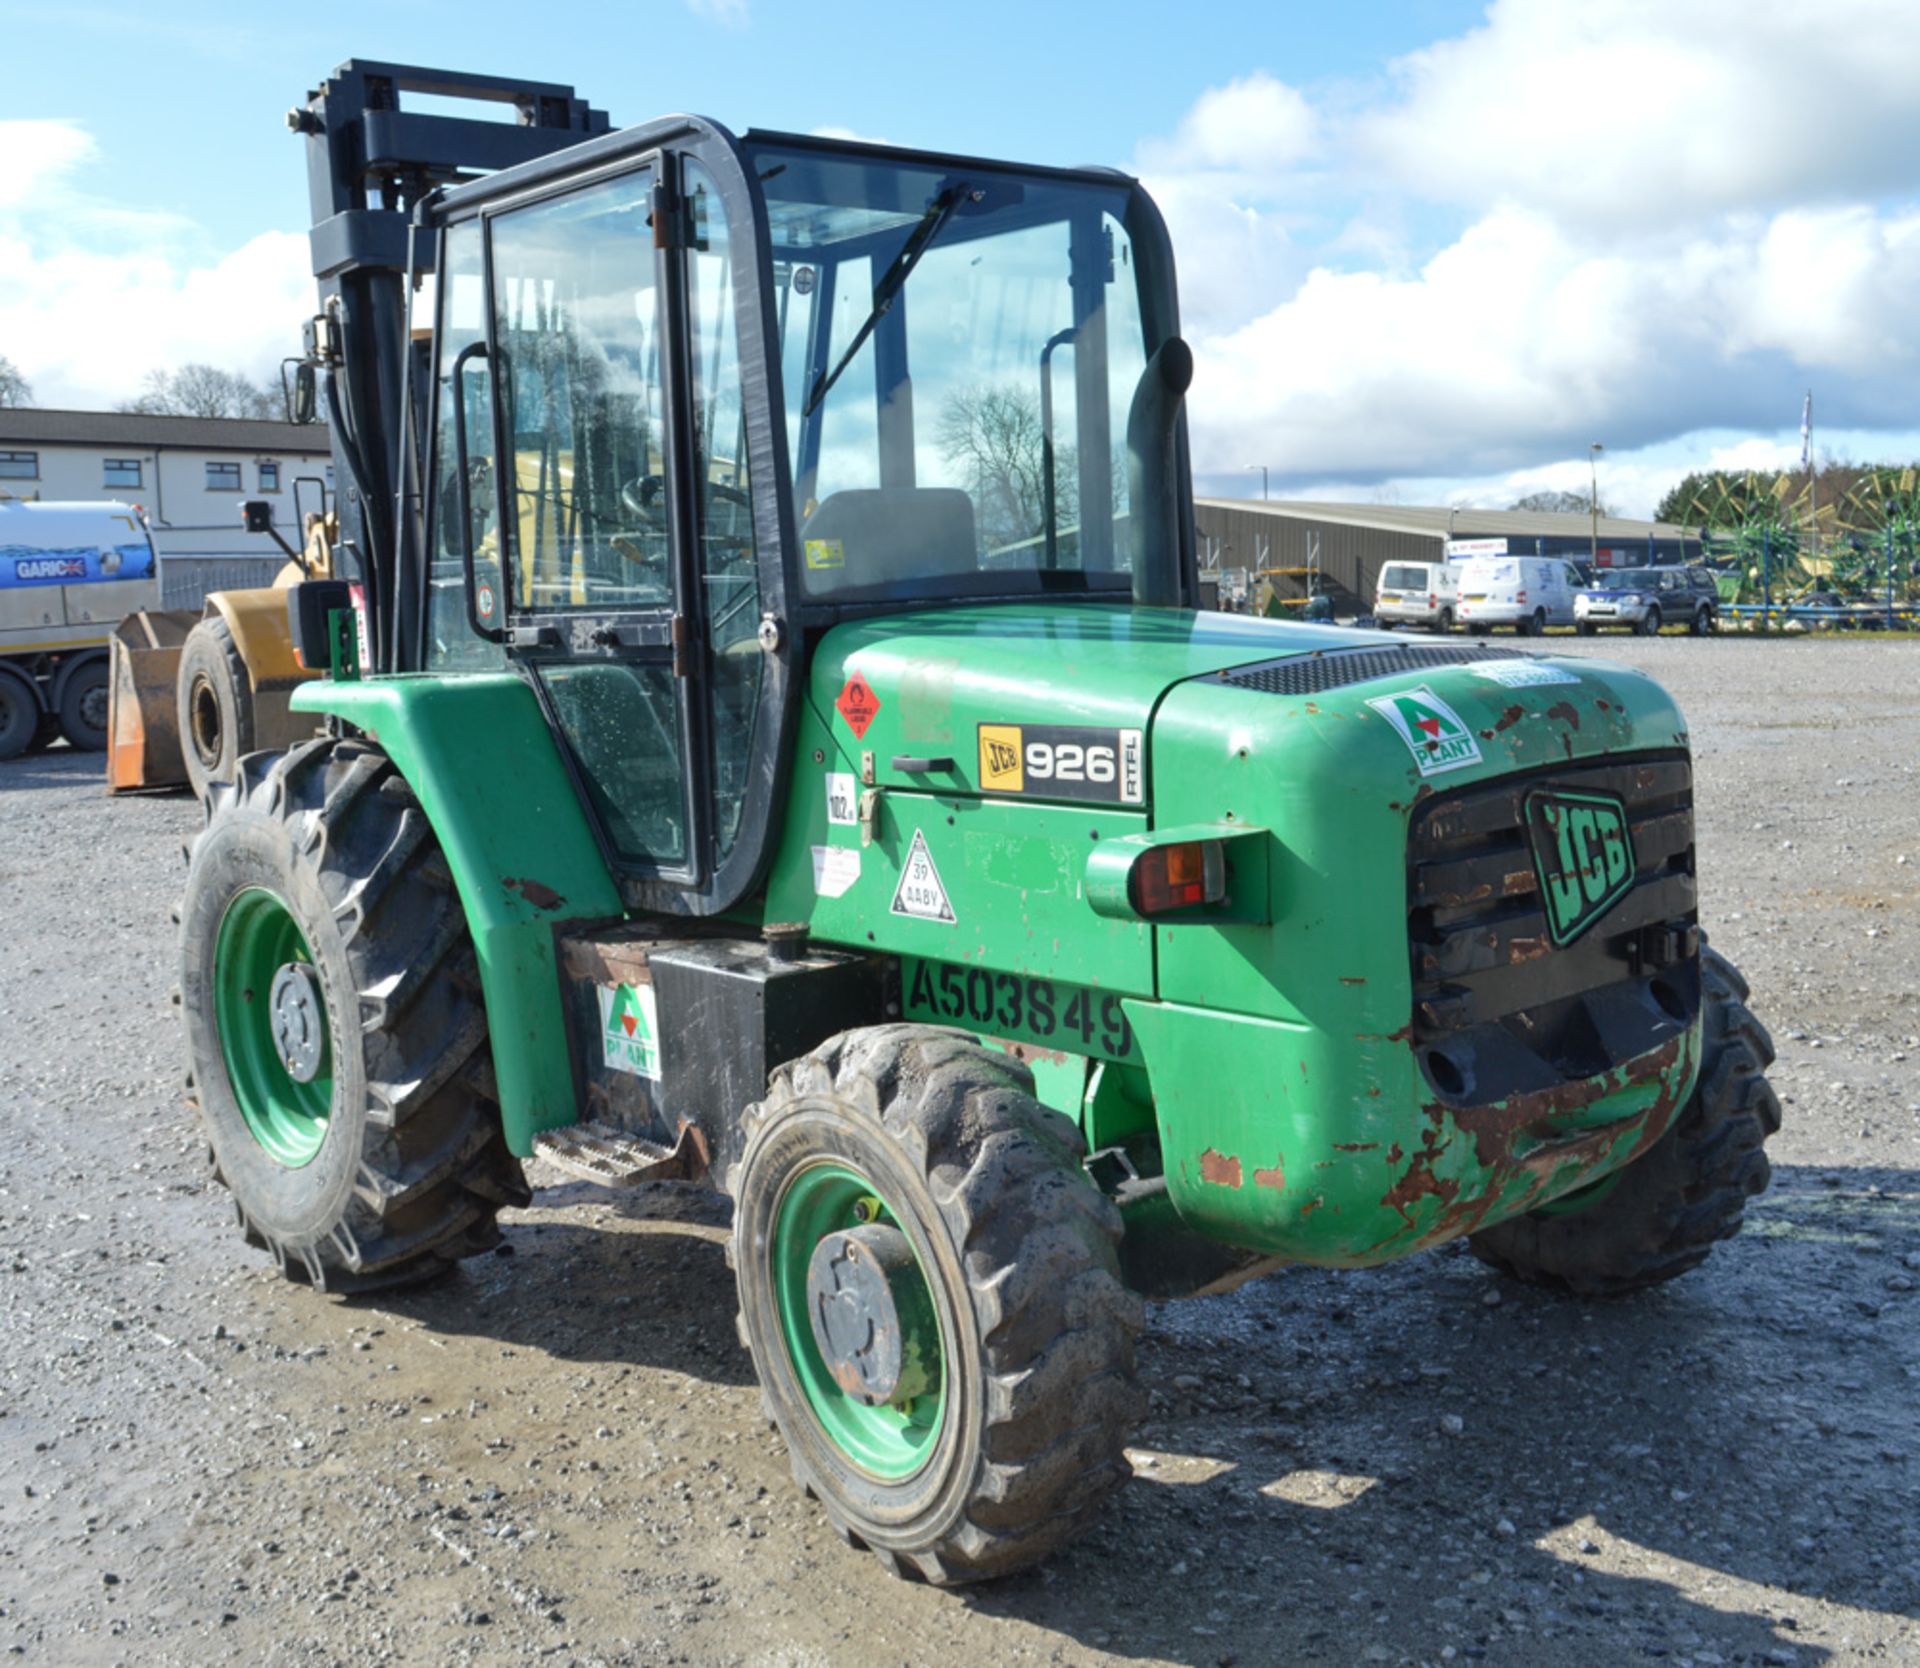 JCB 926 rough terrain fork lift truck Year: 2008 S/N: 1281489 Recorded Hours: 2188 A503849 - Image 2 of 12